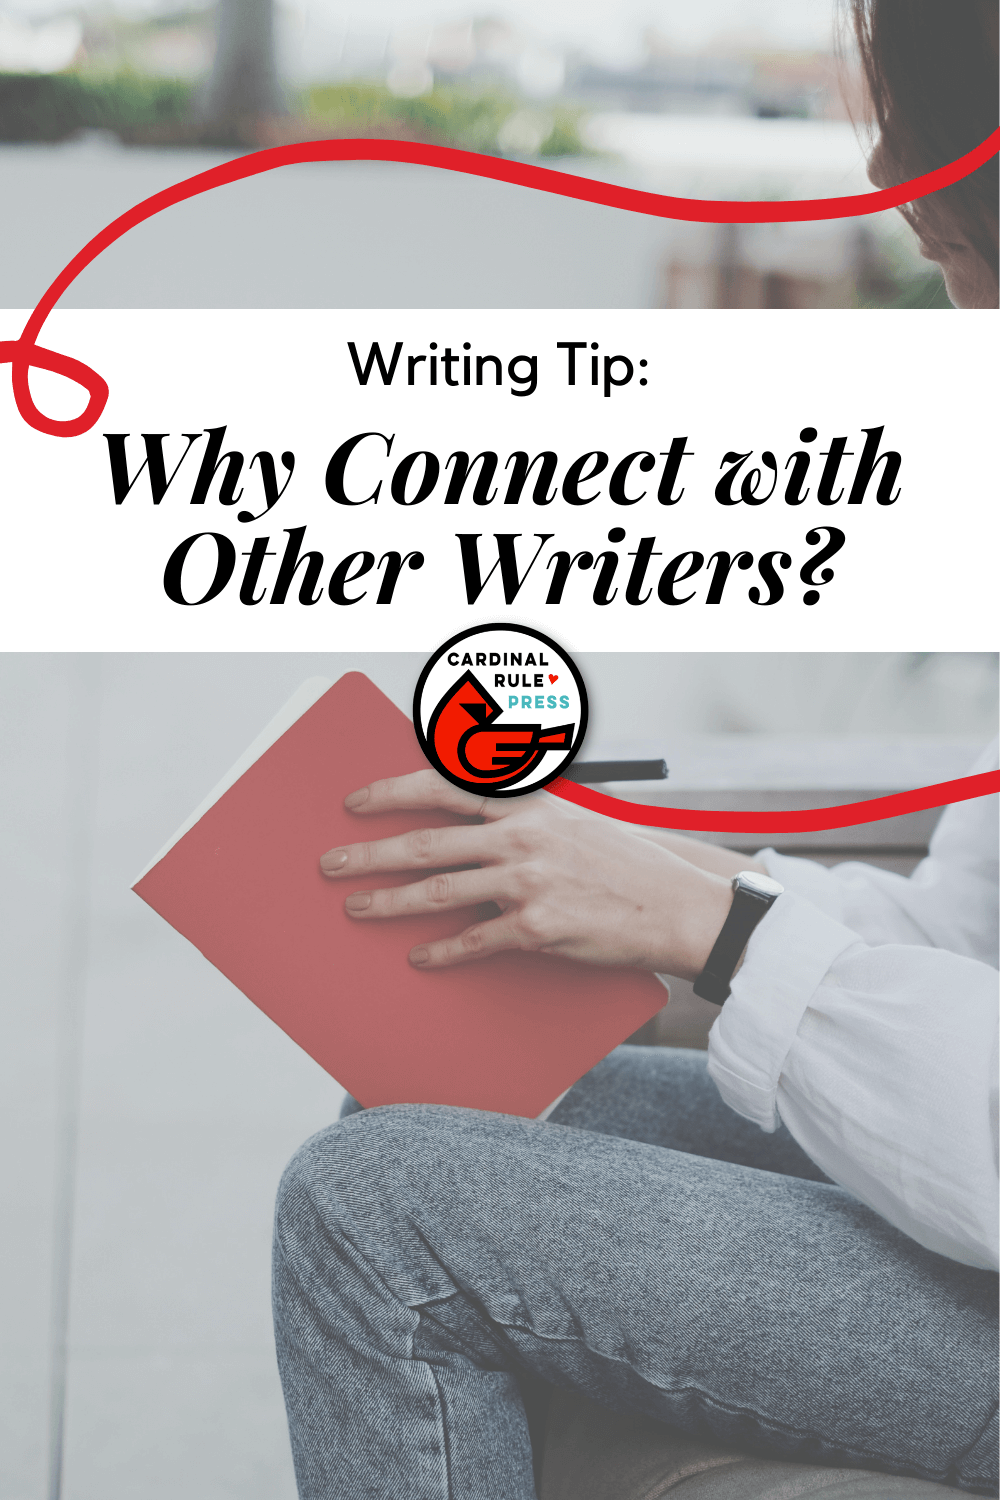 Writing Tip: Why Connect with Other Writers? There is value in connecting with other writers, no matter where you are in your author journey. #WritingTip #ForWriters #ConnectingWithWriters